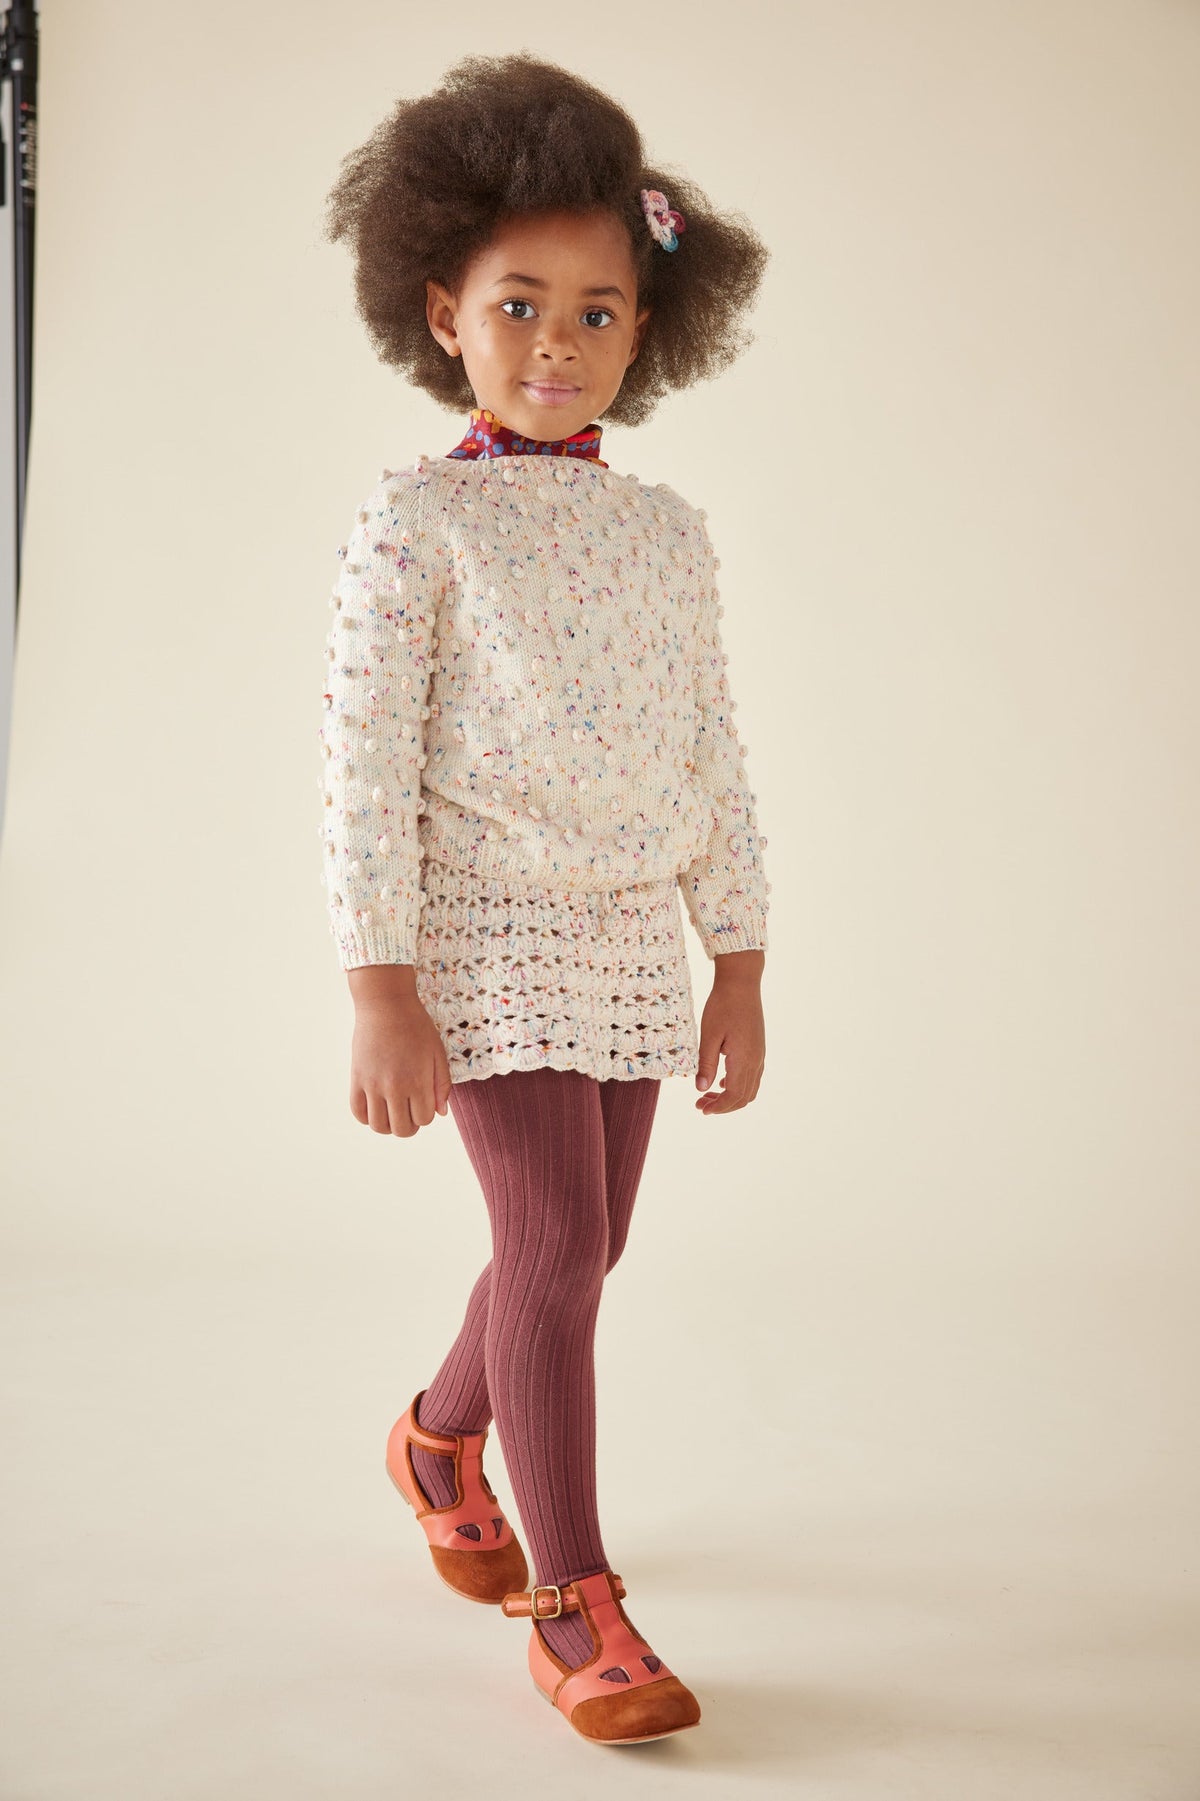 Popcorn Sweater - Lolipop Confetti+Model is 44.5 inches tall, 44lbs, wearing a size 4-5y